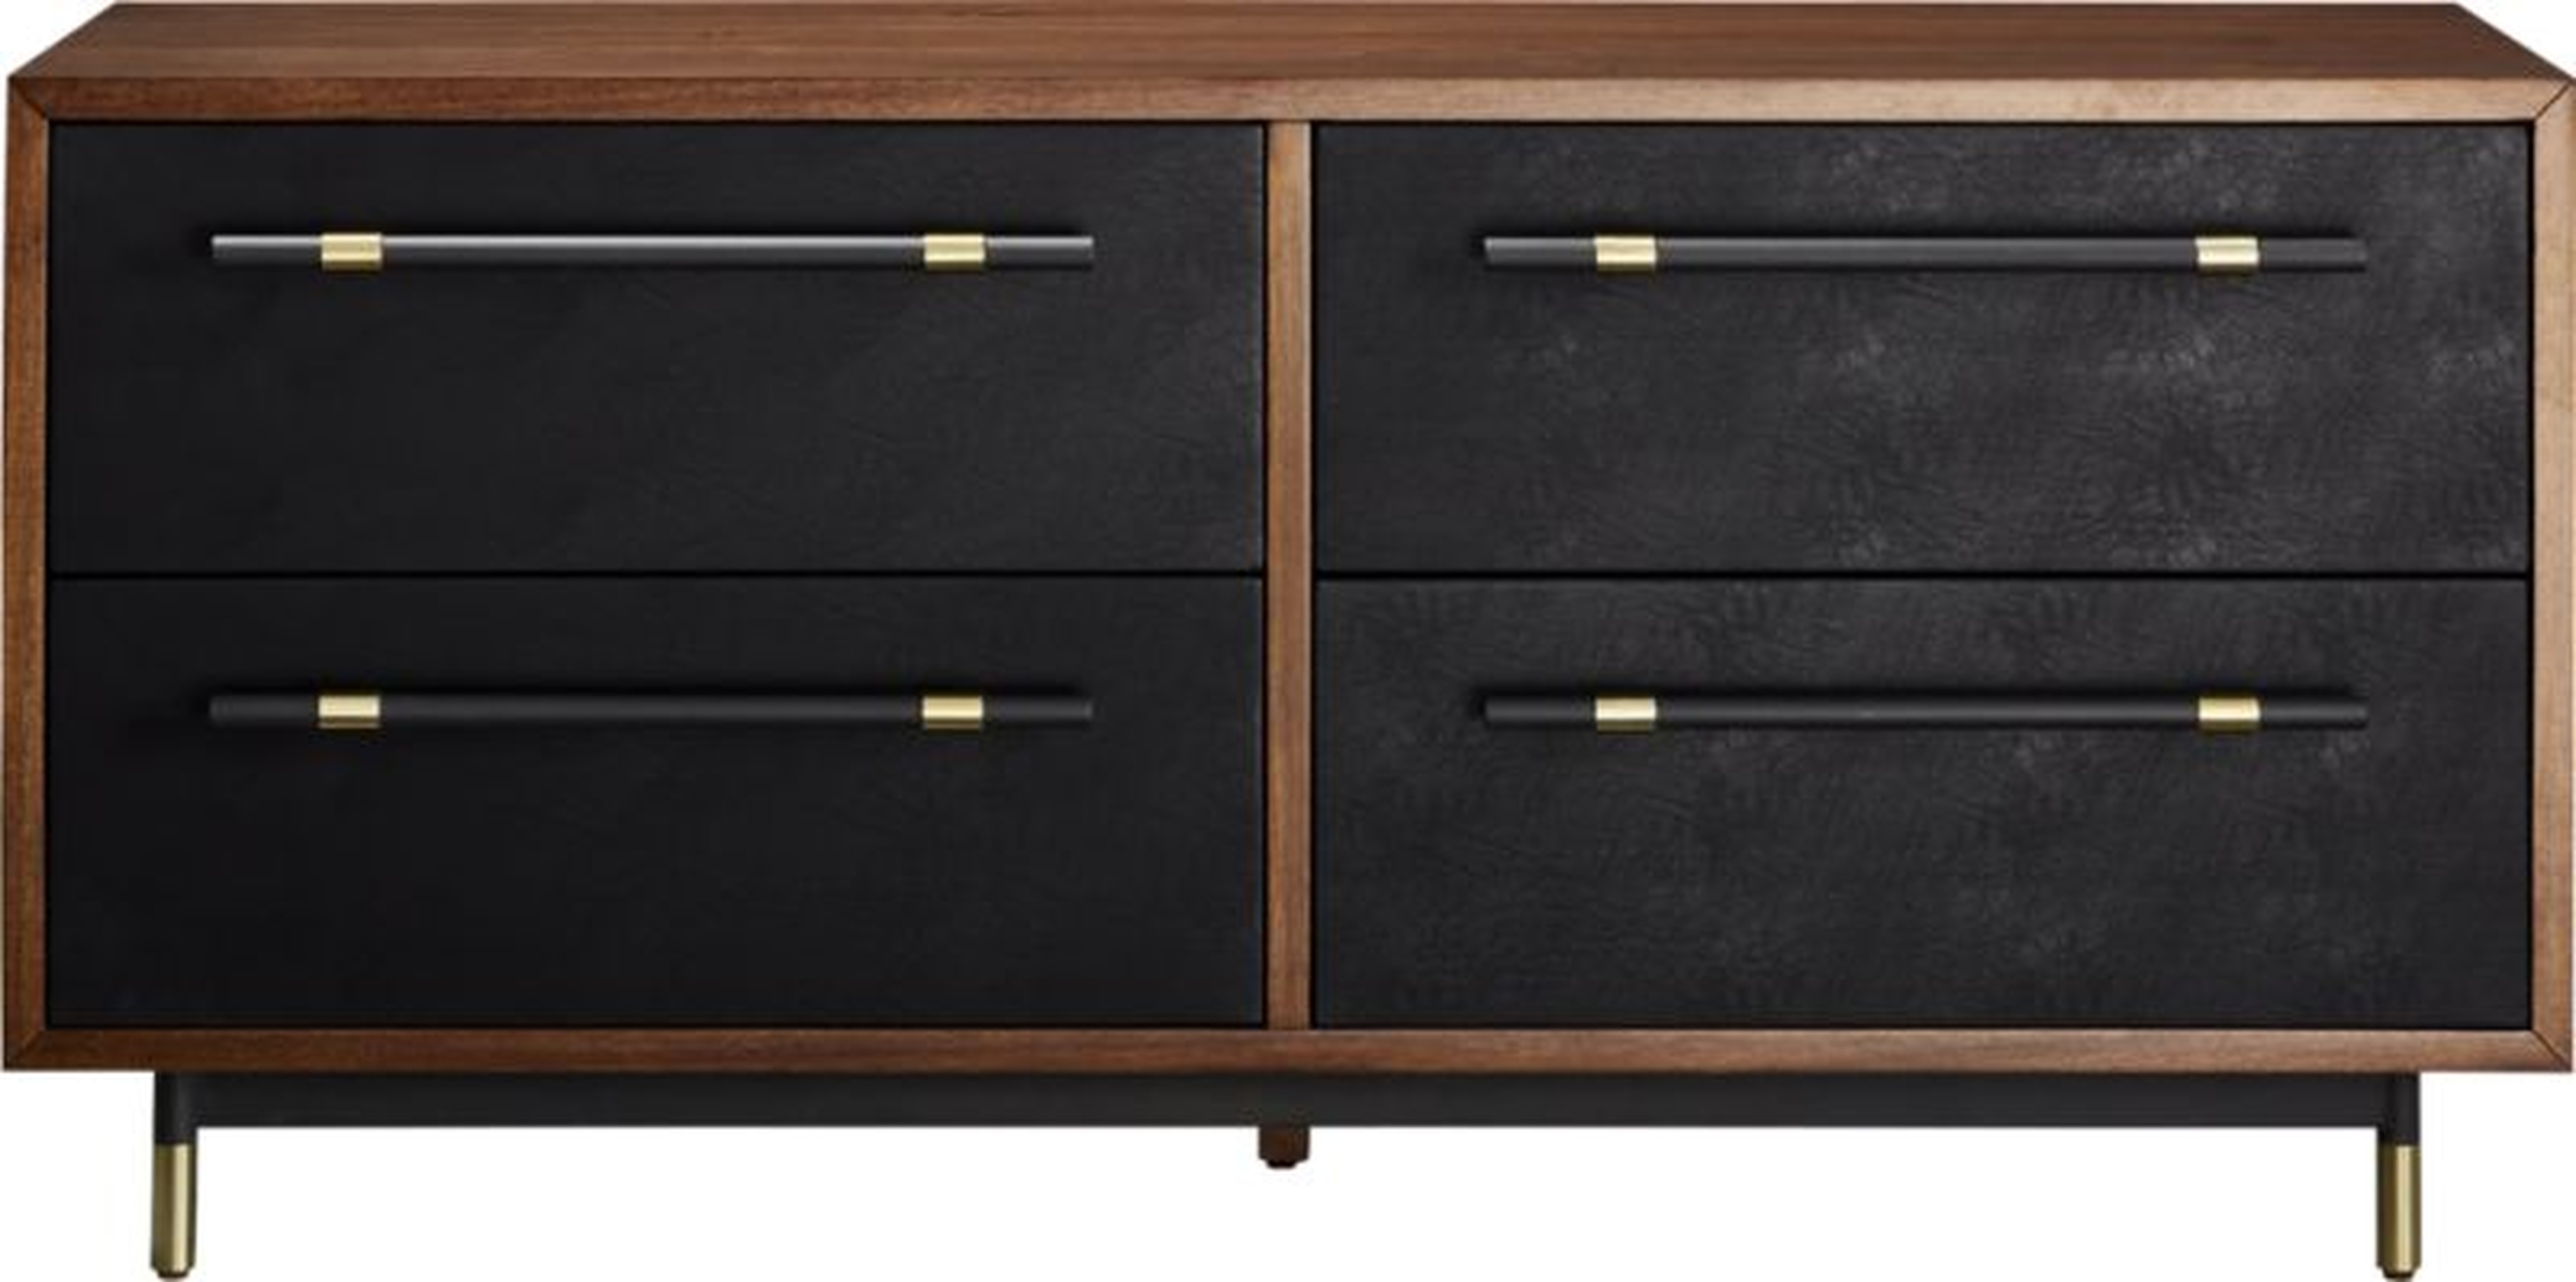 Oberlin 4-Drawer Black Leather and Wood Dresser - CB2